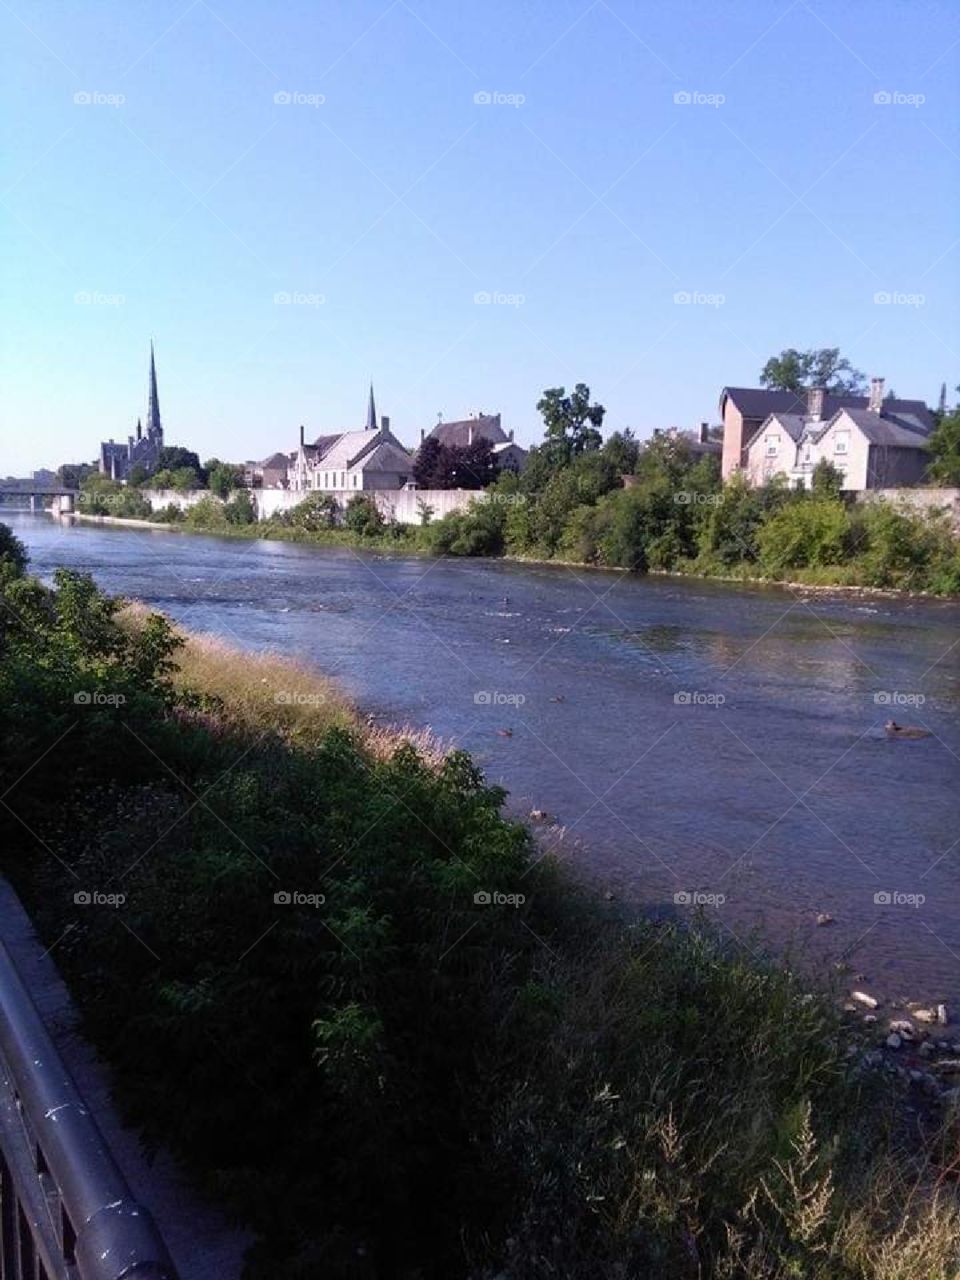 Grand river. Gorgeous spot to relax